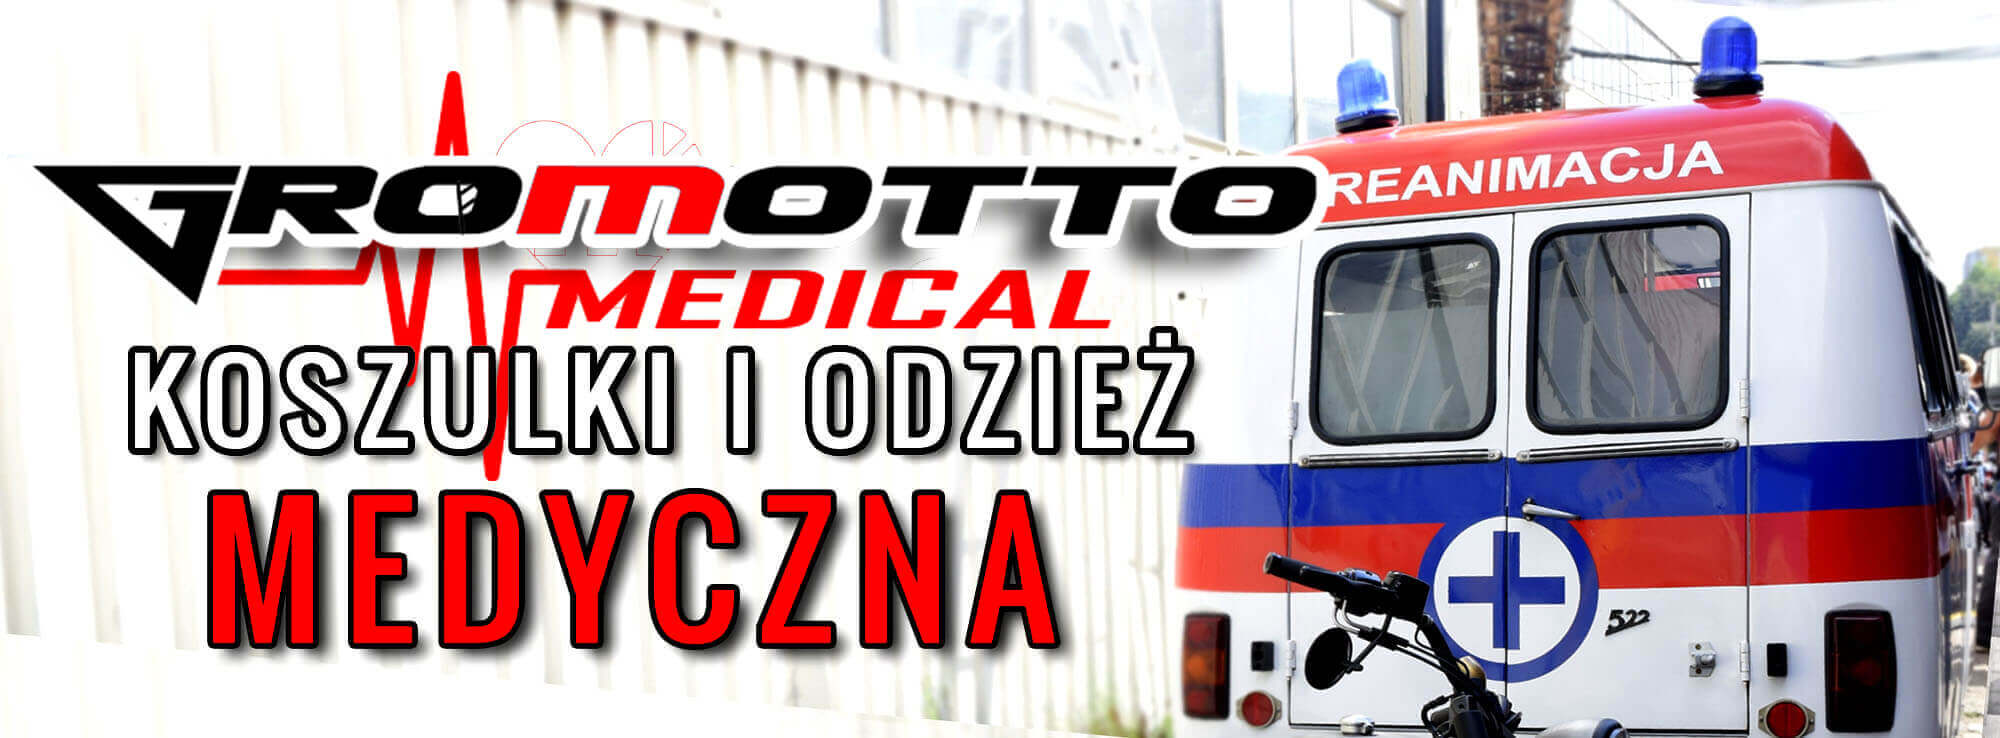  GROMOTTO MEDICAL